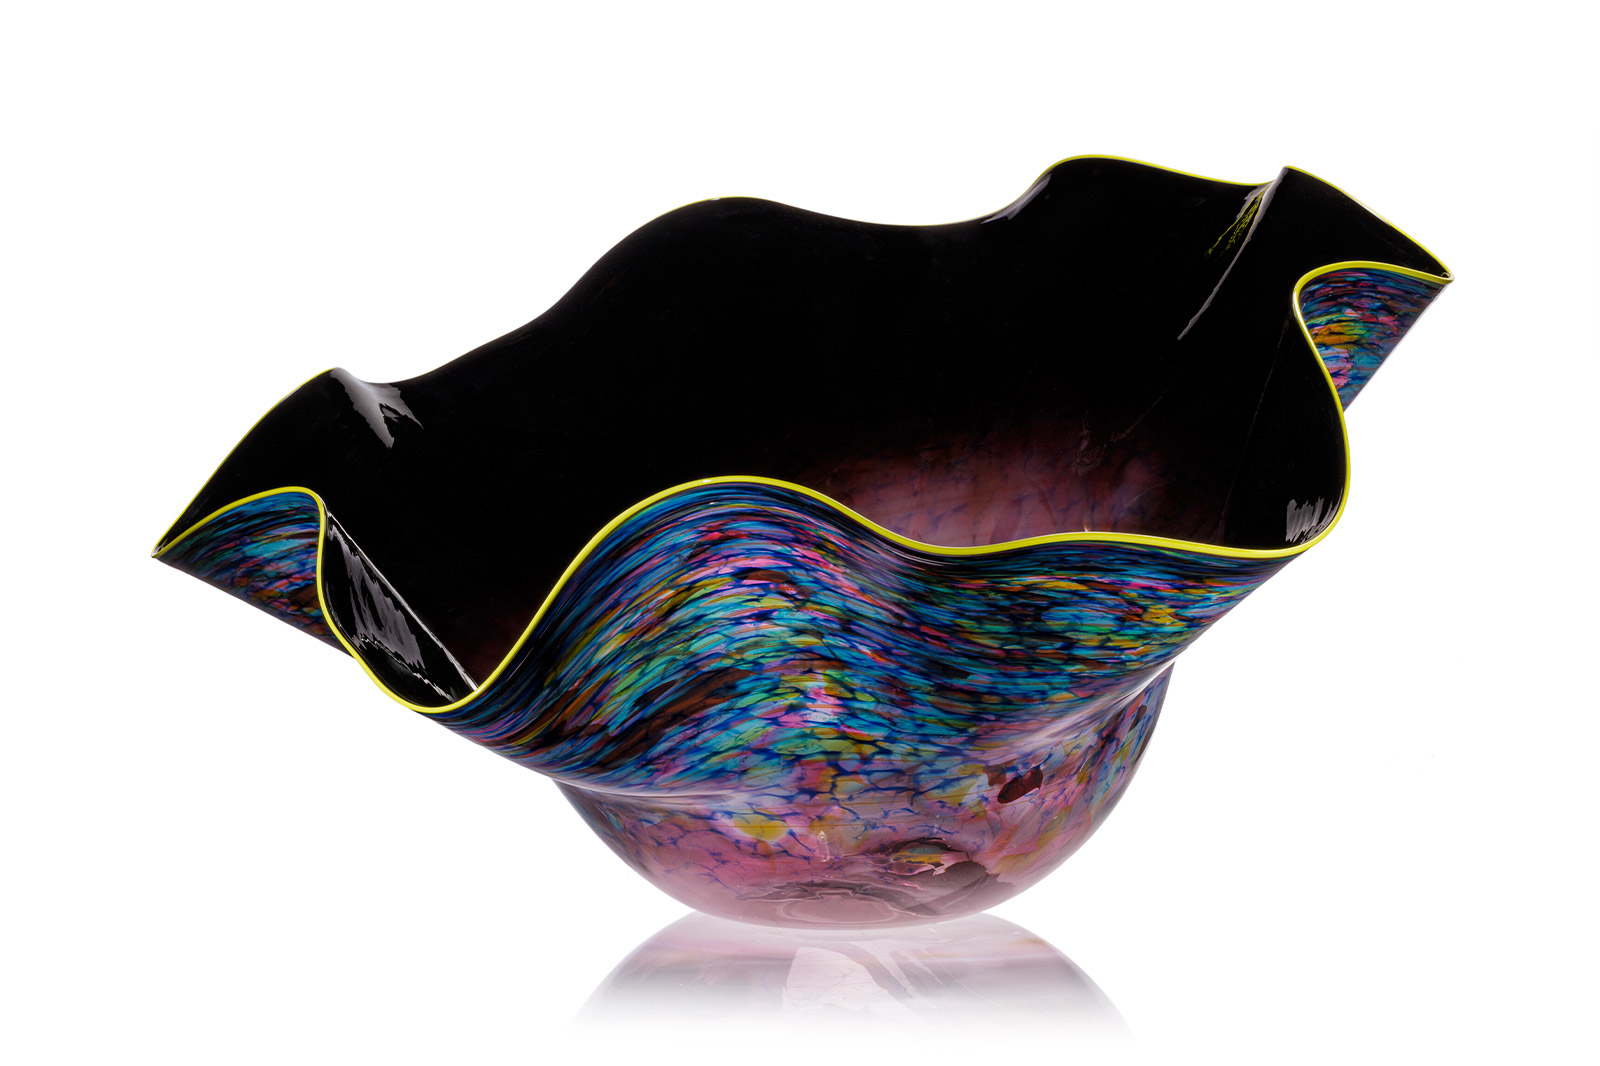 Deep Plum Macchia with Citronelle Lip Wrap, 2007, Dale Chihuly